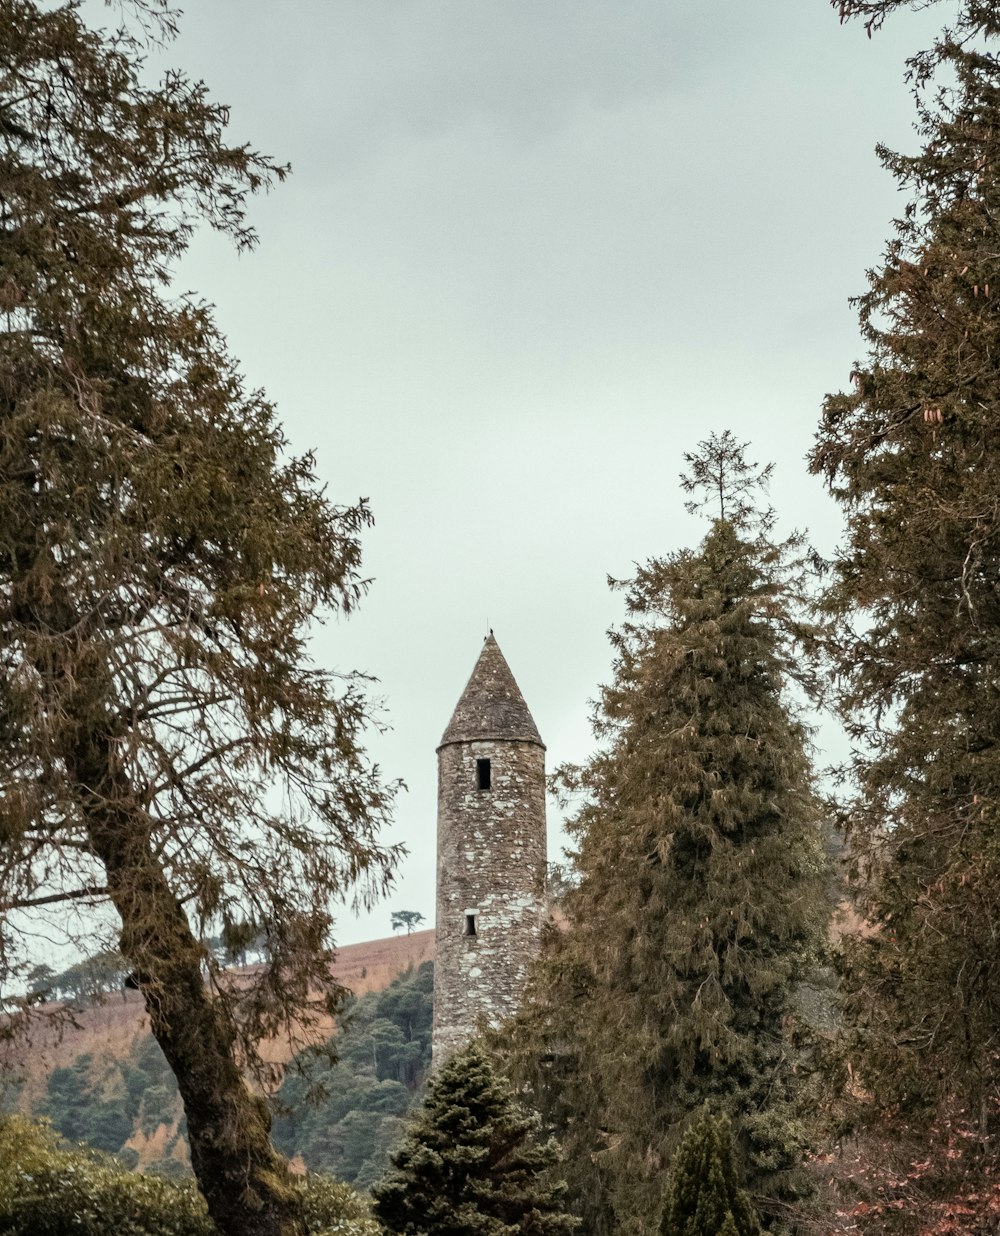 gray and brown tower near trees